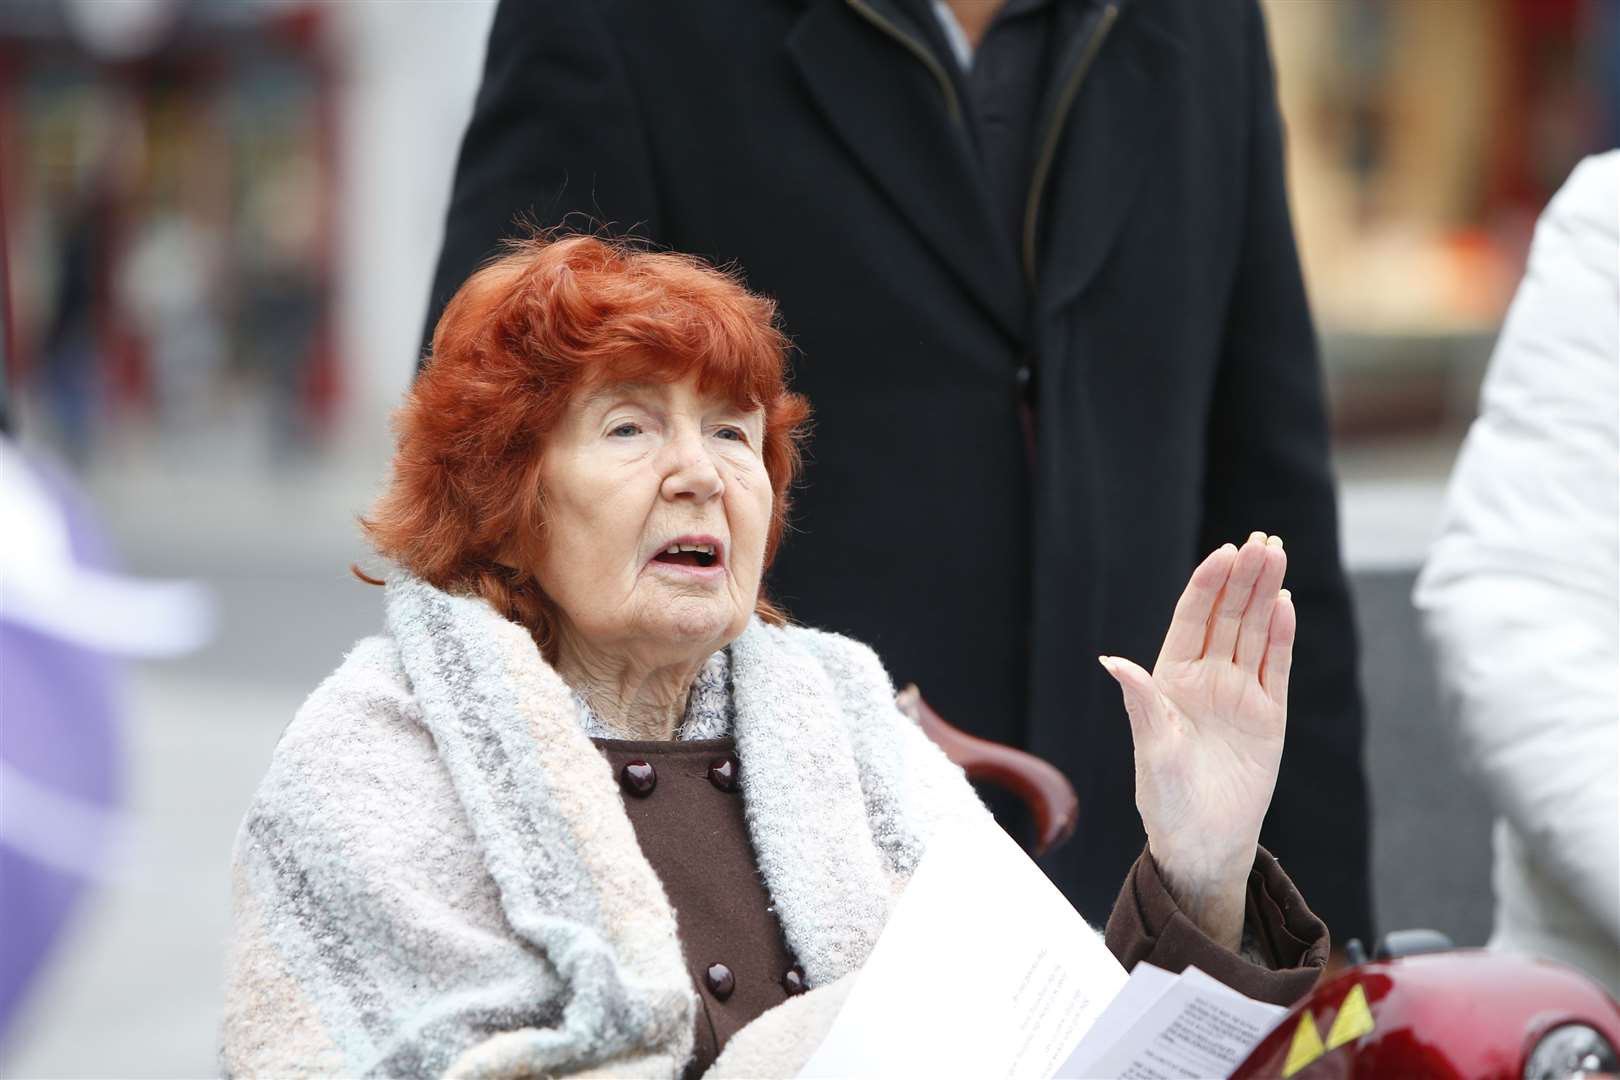 A memorial service for the homeless who have died was held in Maidstone's Jubilee Square. Picture: Andy Jones